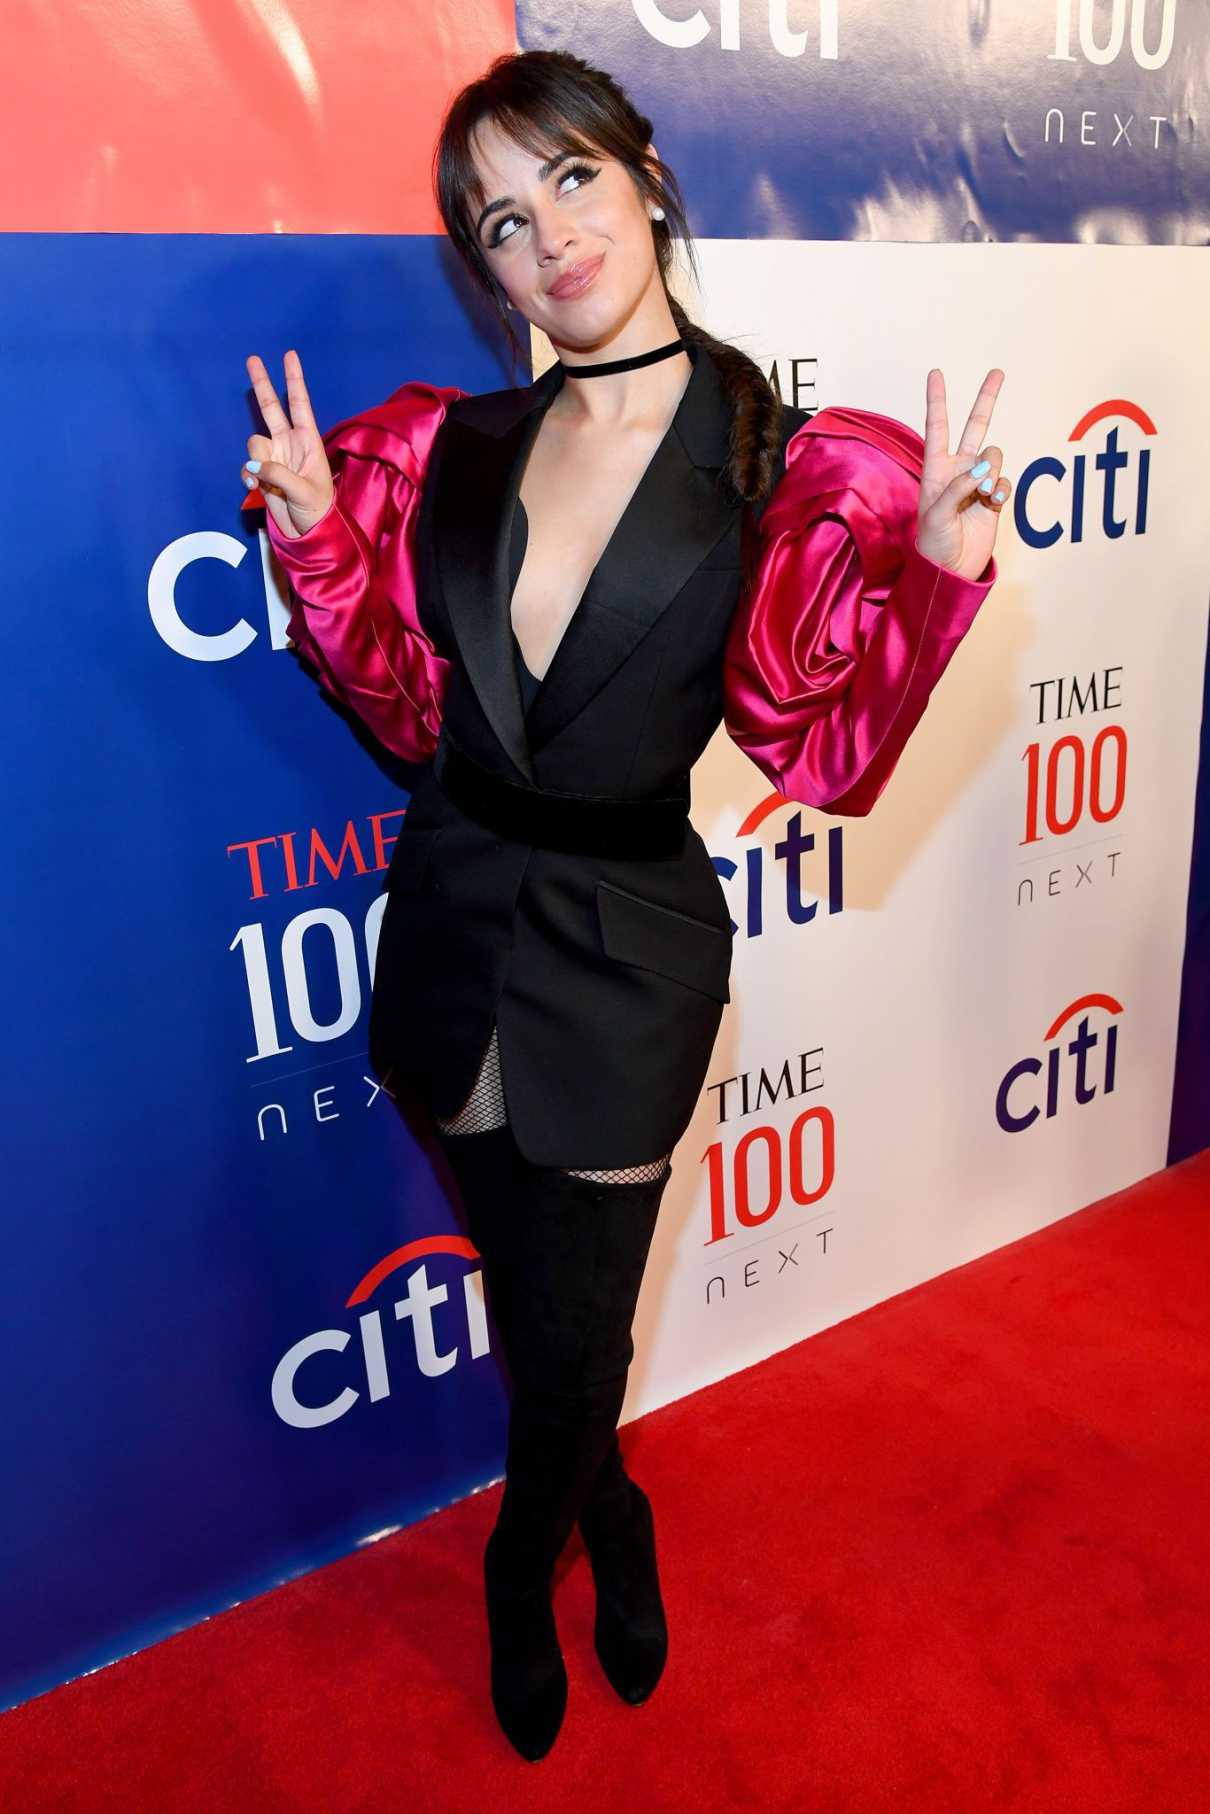 Camila Cabello Attends the Time 100 Next at Pier 17 in NY 11/14/2019-2 ...